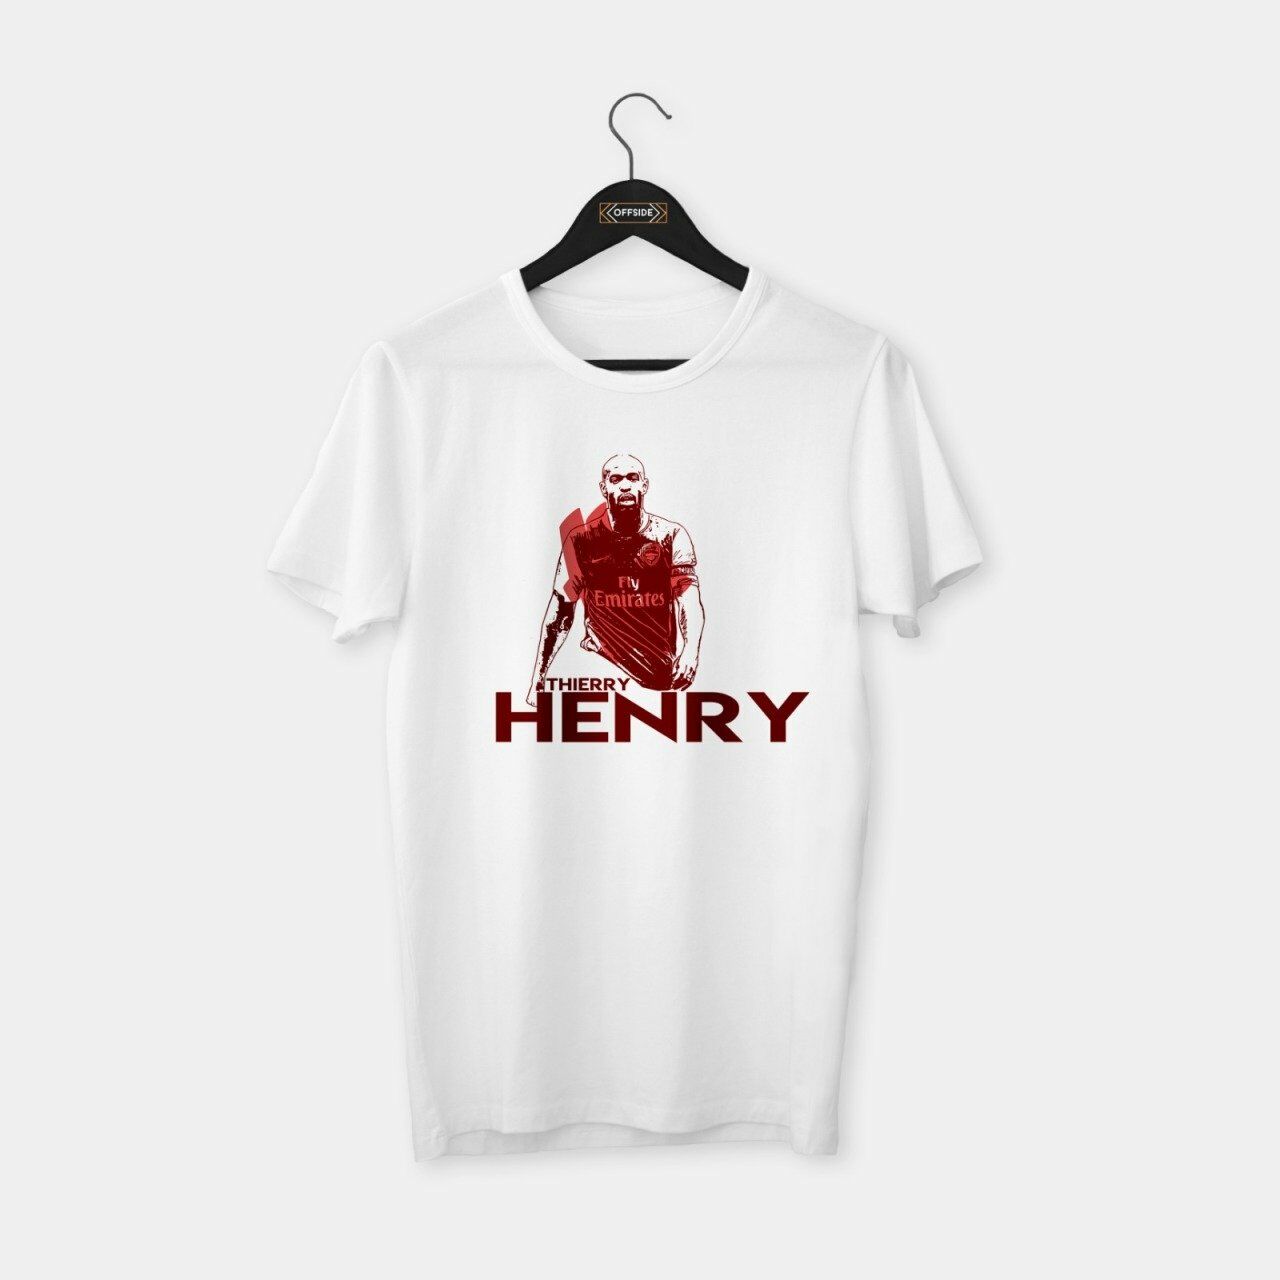 Thierry Henry II T-shirt